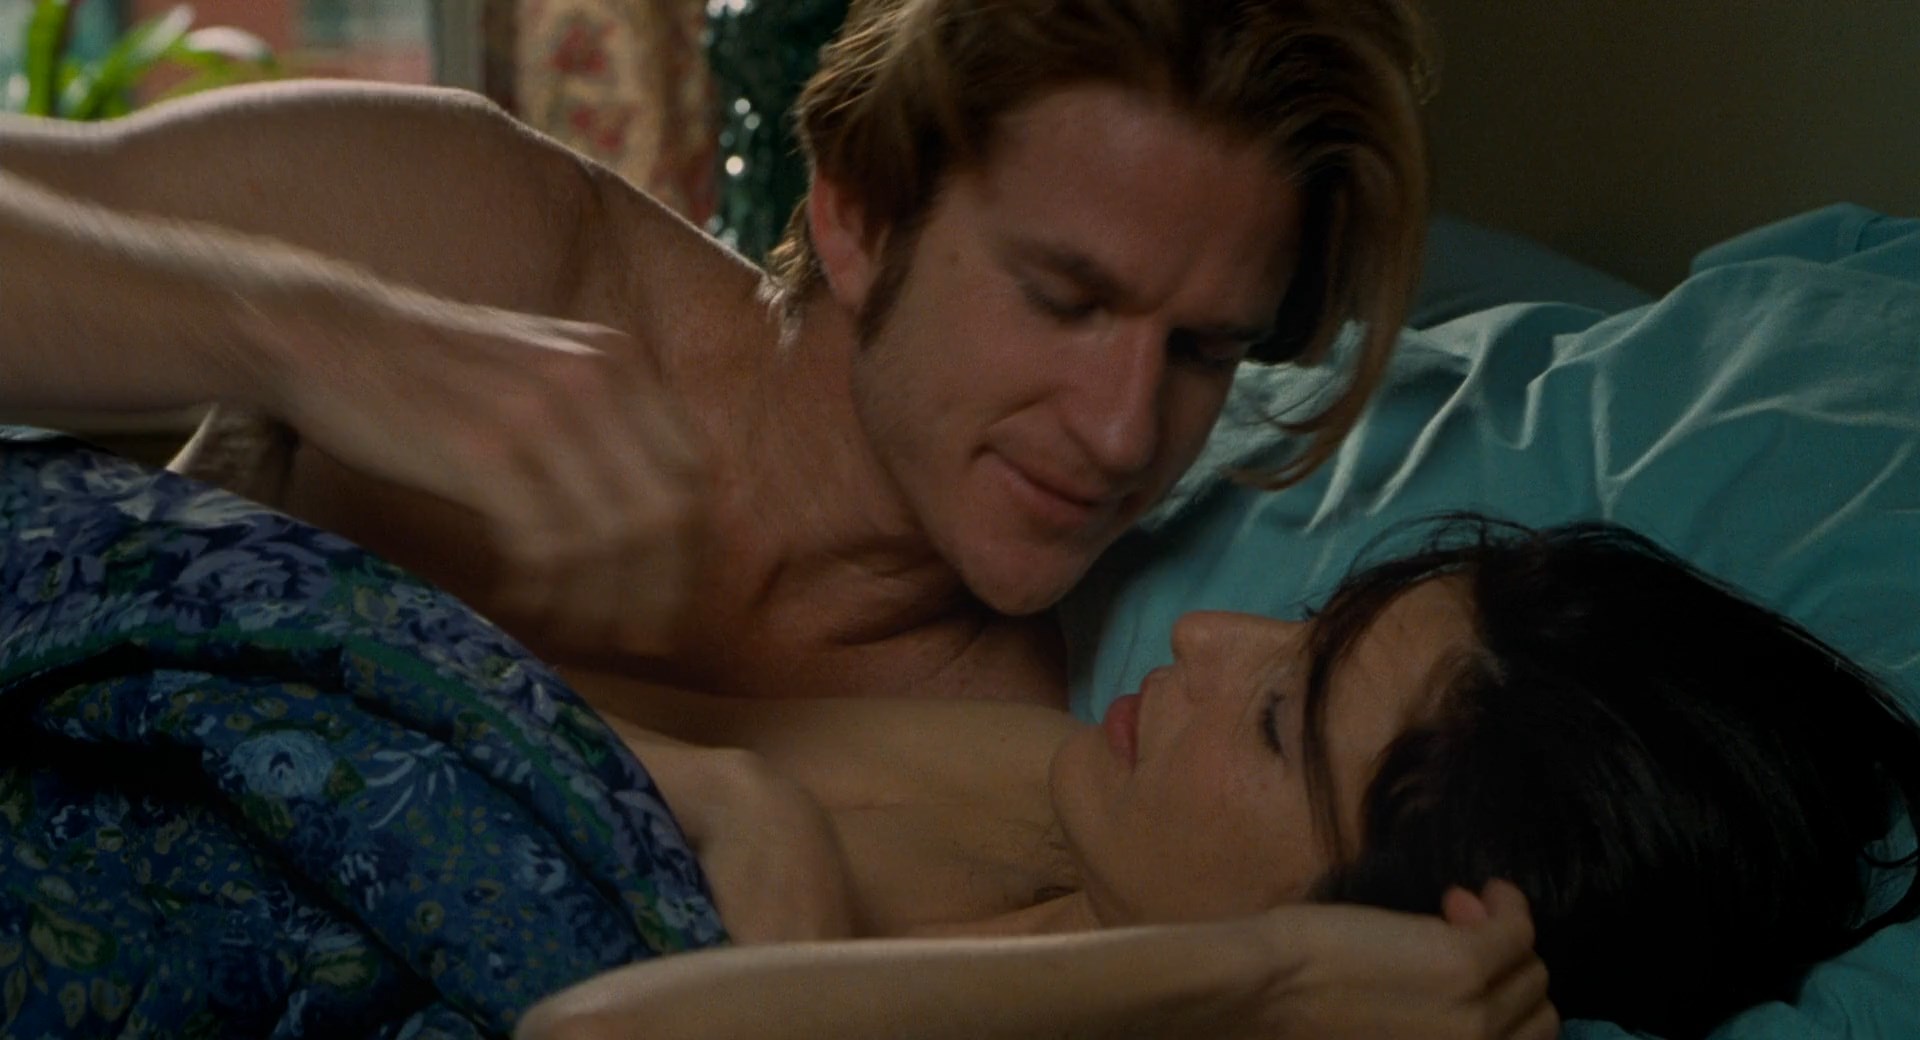 Catherine Keener shows her tit before she gets up from the bed and is cover...